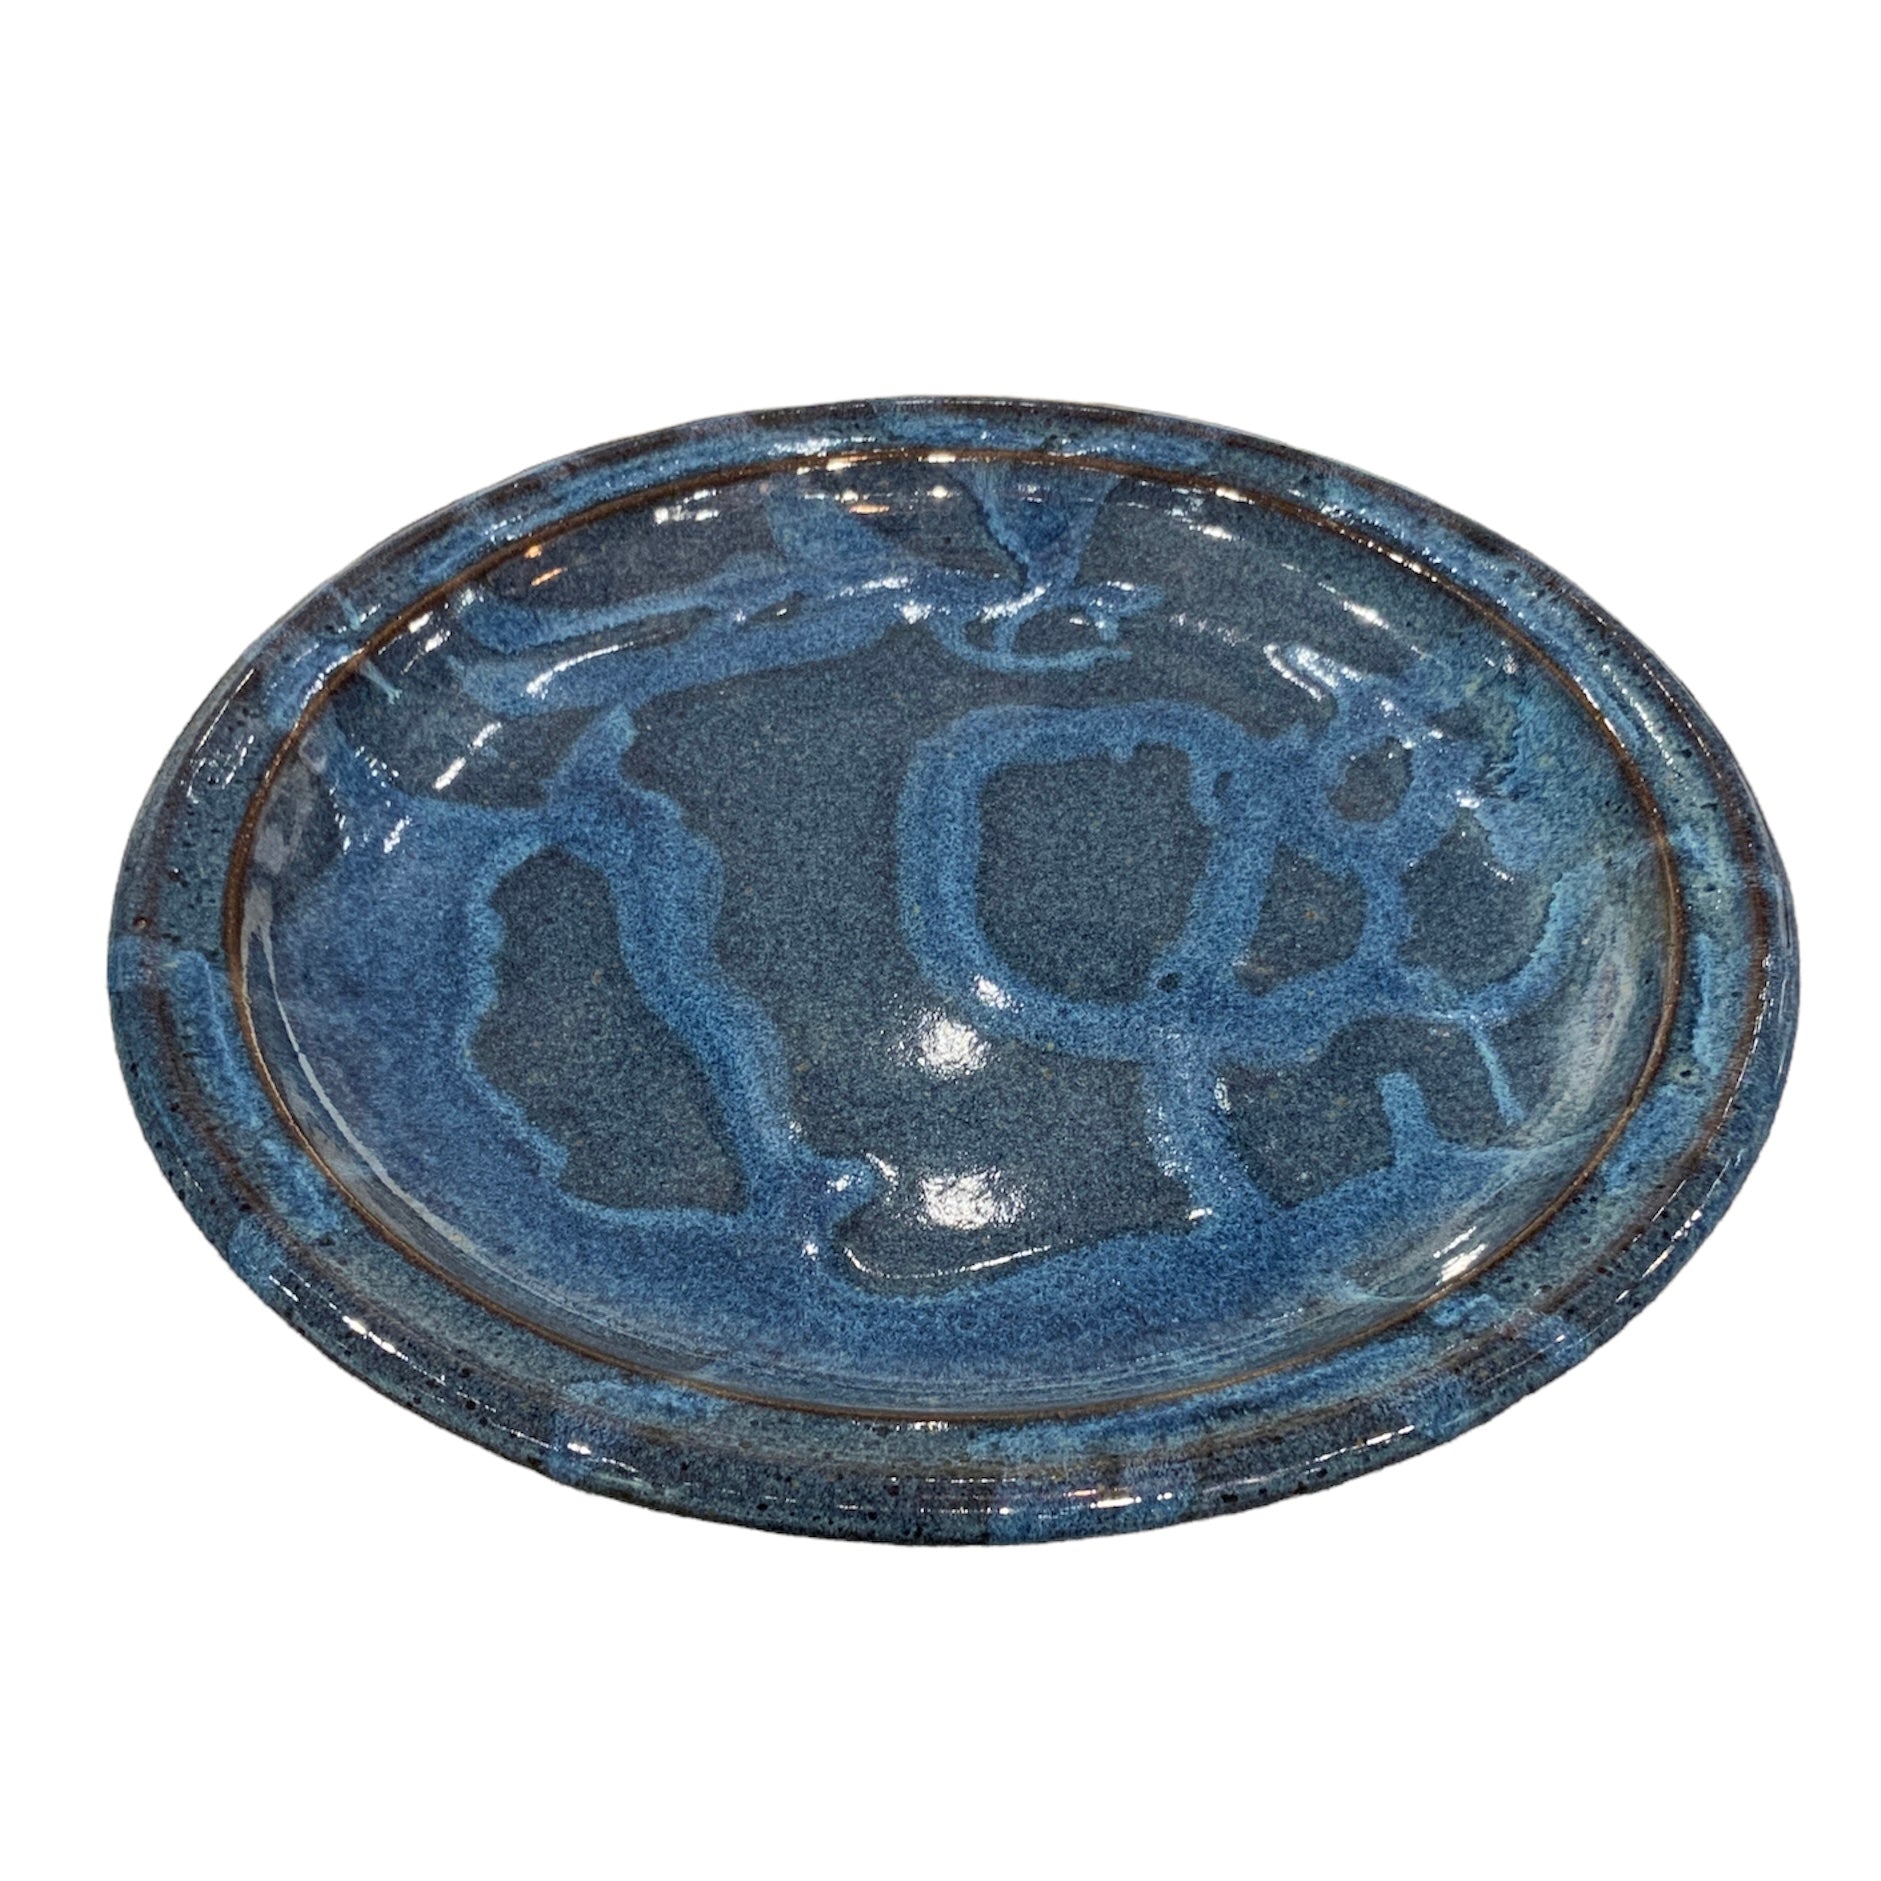 LARGE PLATE - ABSTRACT BLUE SWIRLS